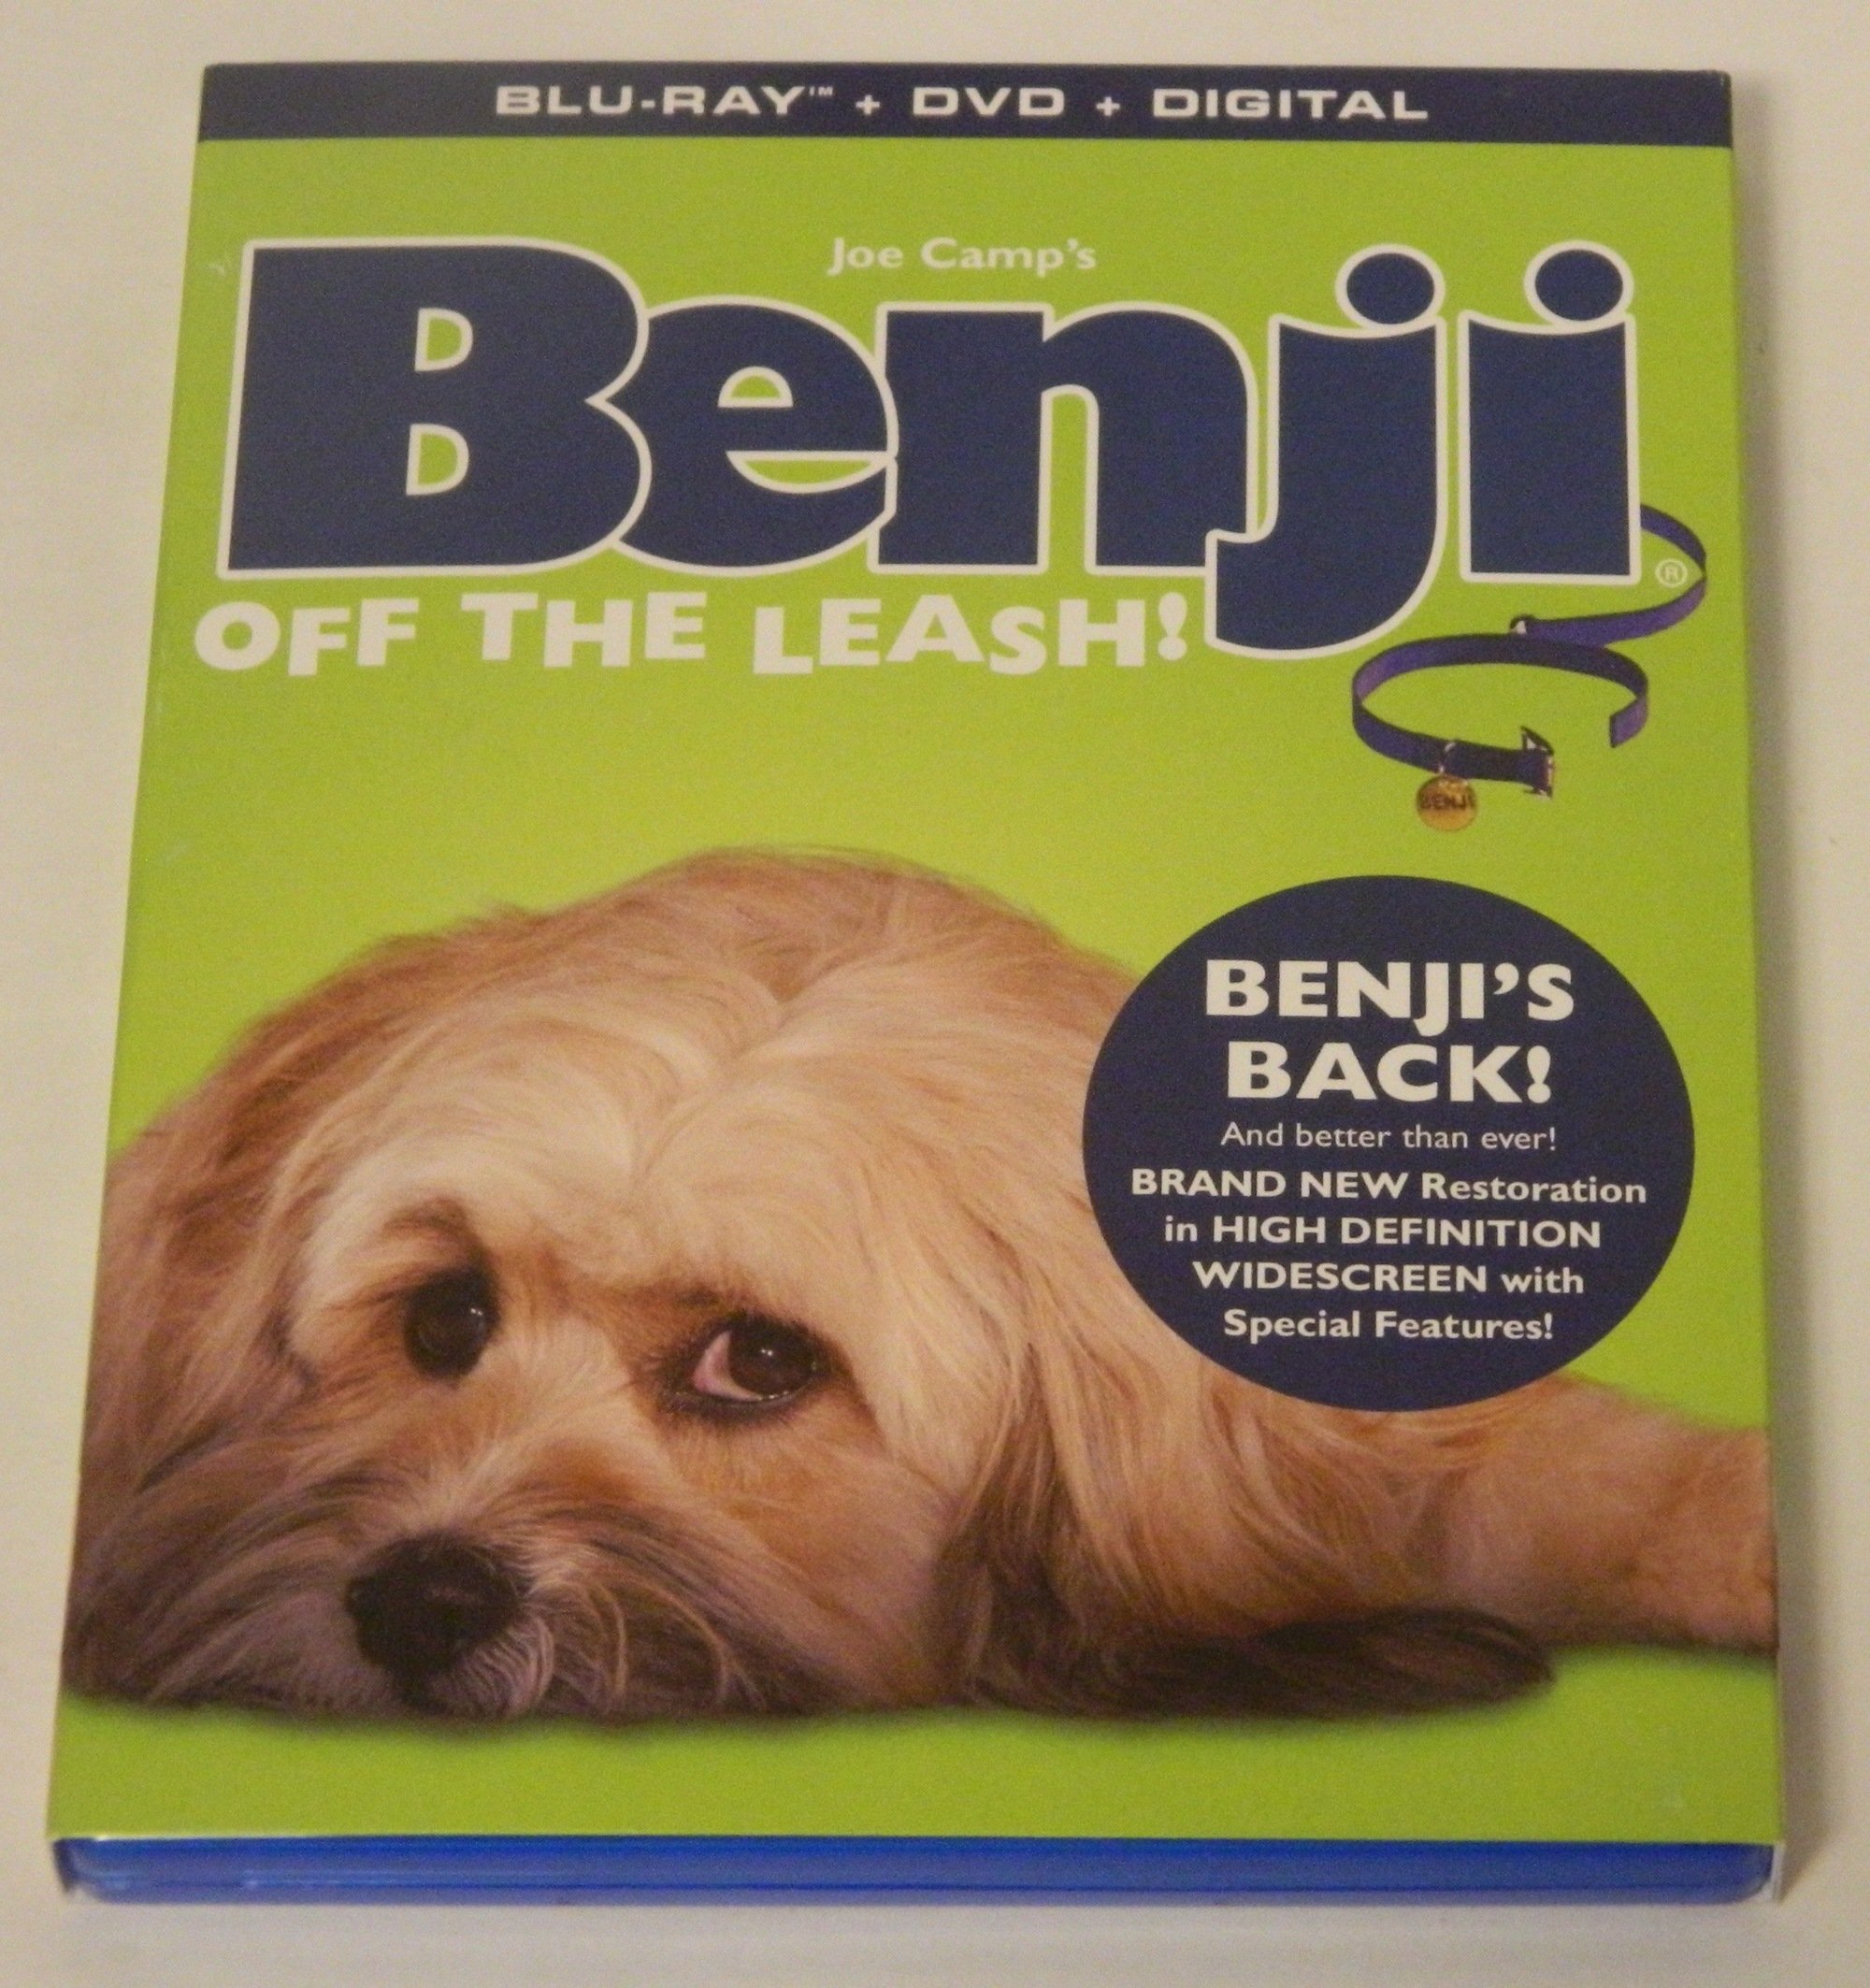 Benji: Off the Leash! Blu-ray Review